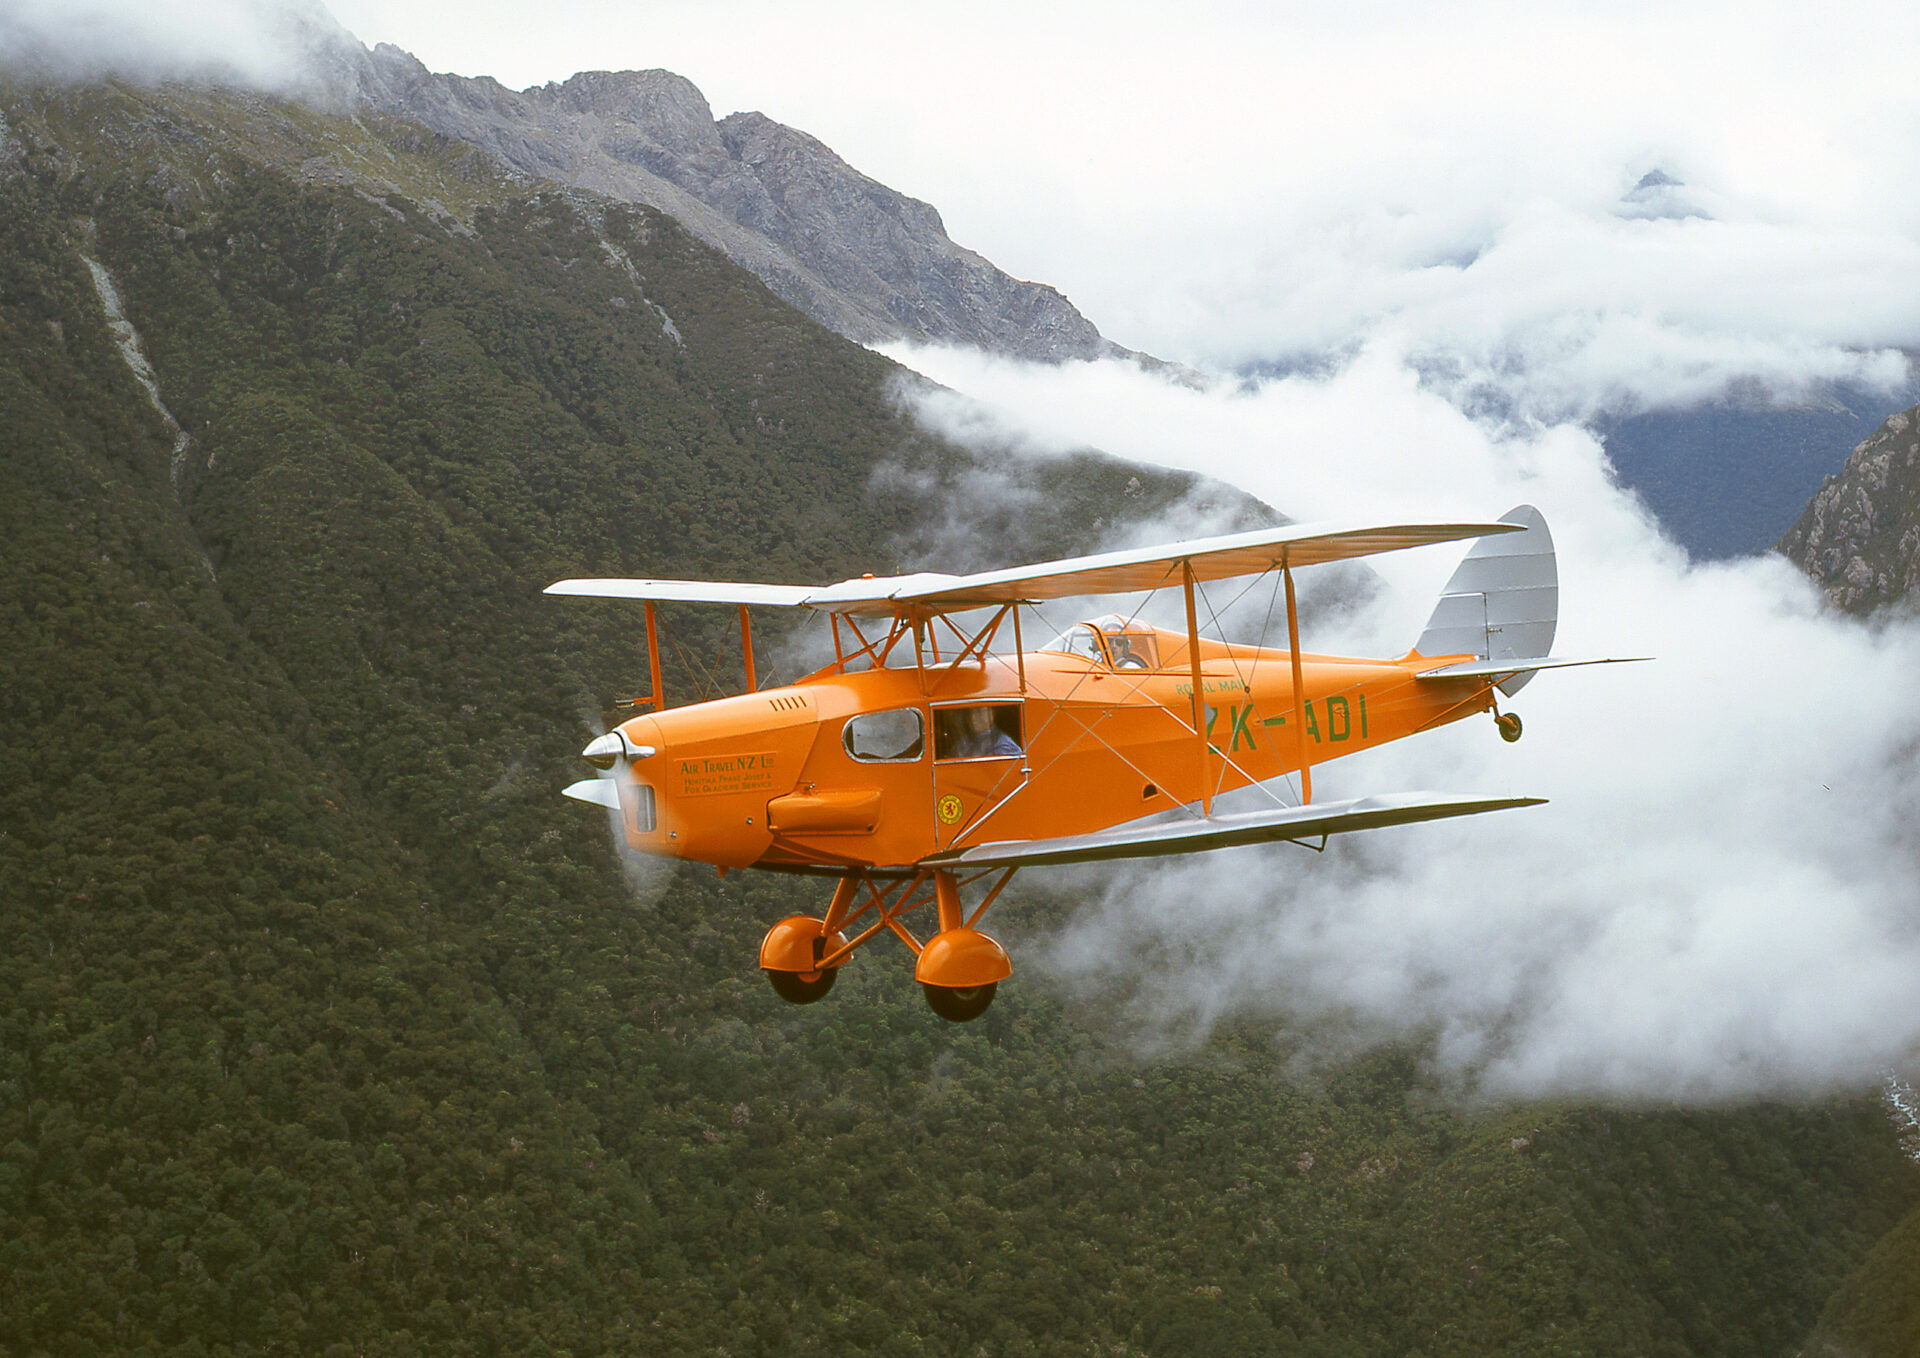 New Zealand’s first airliner; de Havilland DH83 Fox Moth ZK-ADI, used by Captain Bert Mercer on 18 December 1934 to pioneer New Zealand’s first licensed scheduled air service.